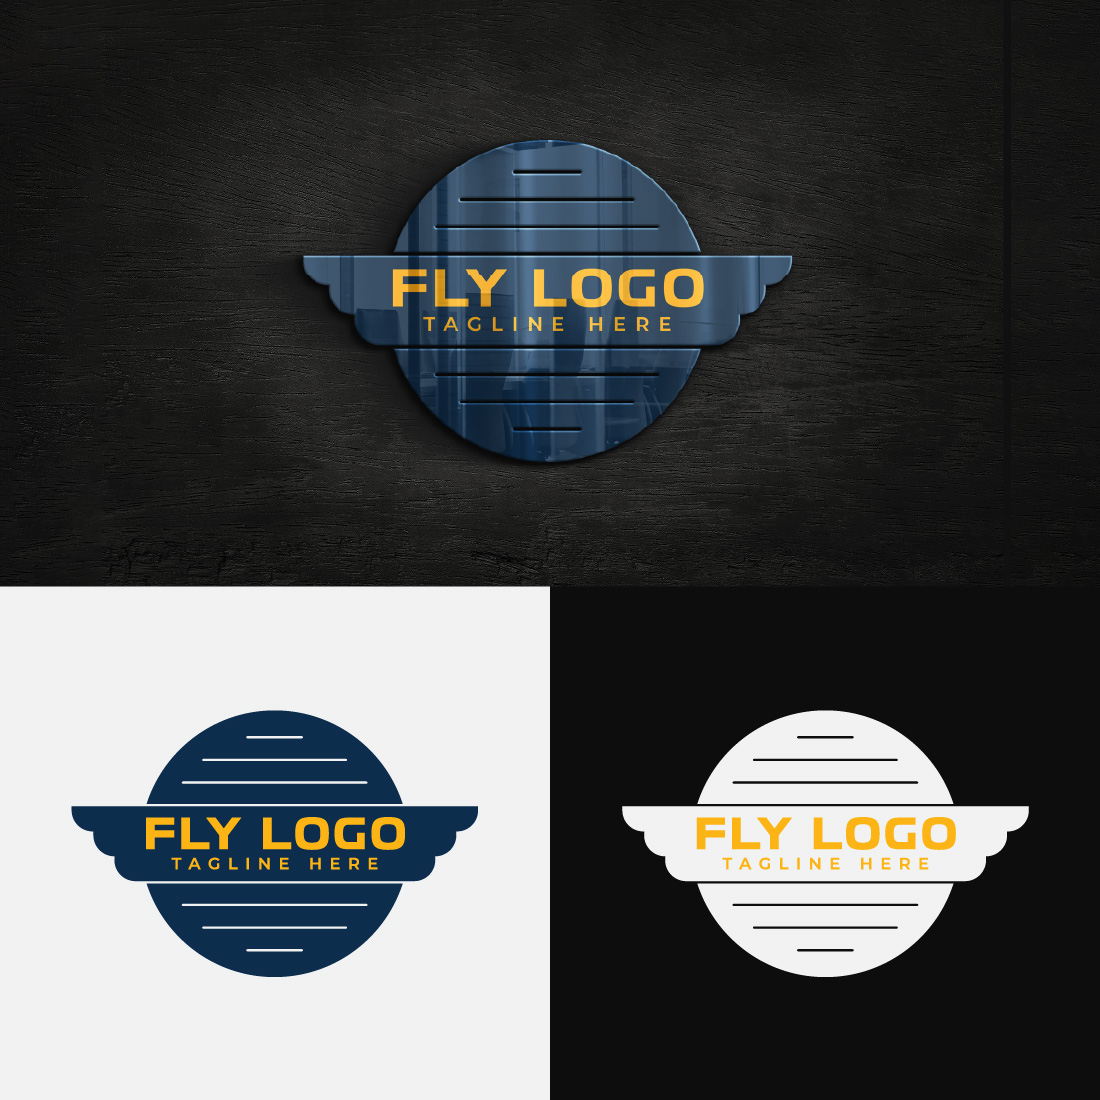 Fly Logo Circle Wings Design Template cover image.